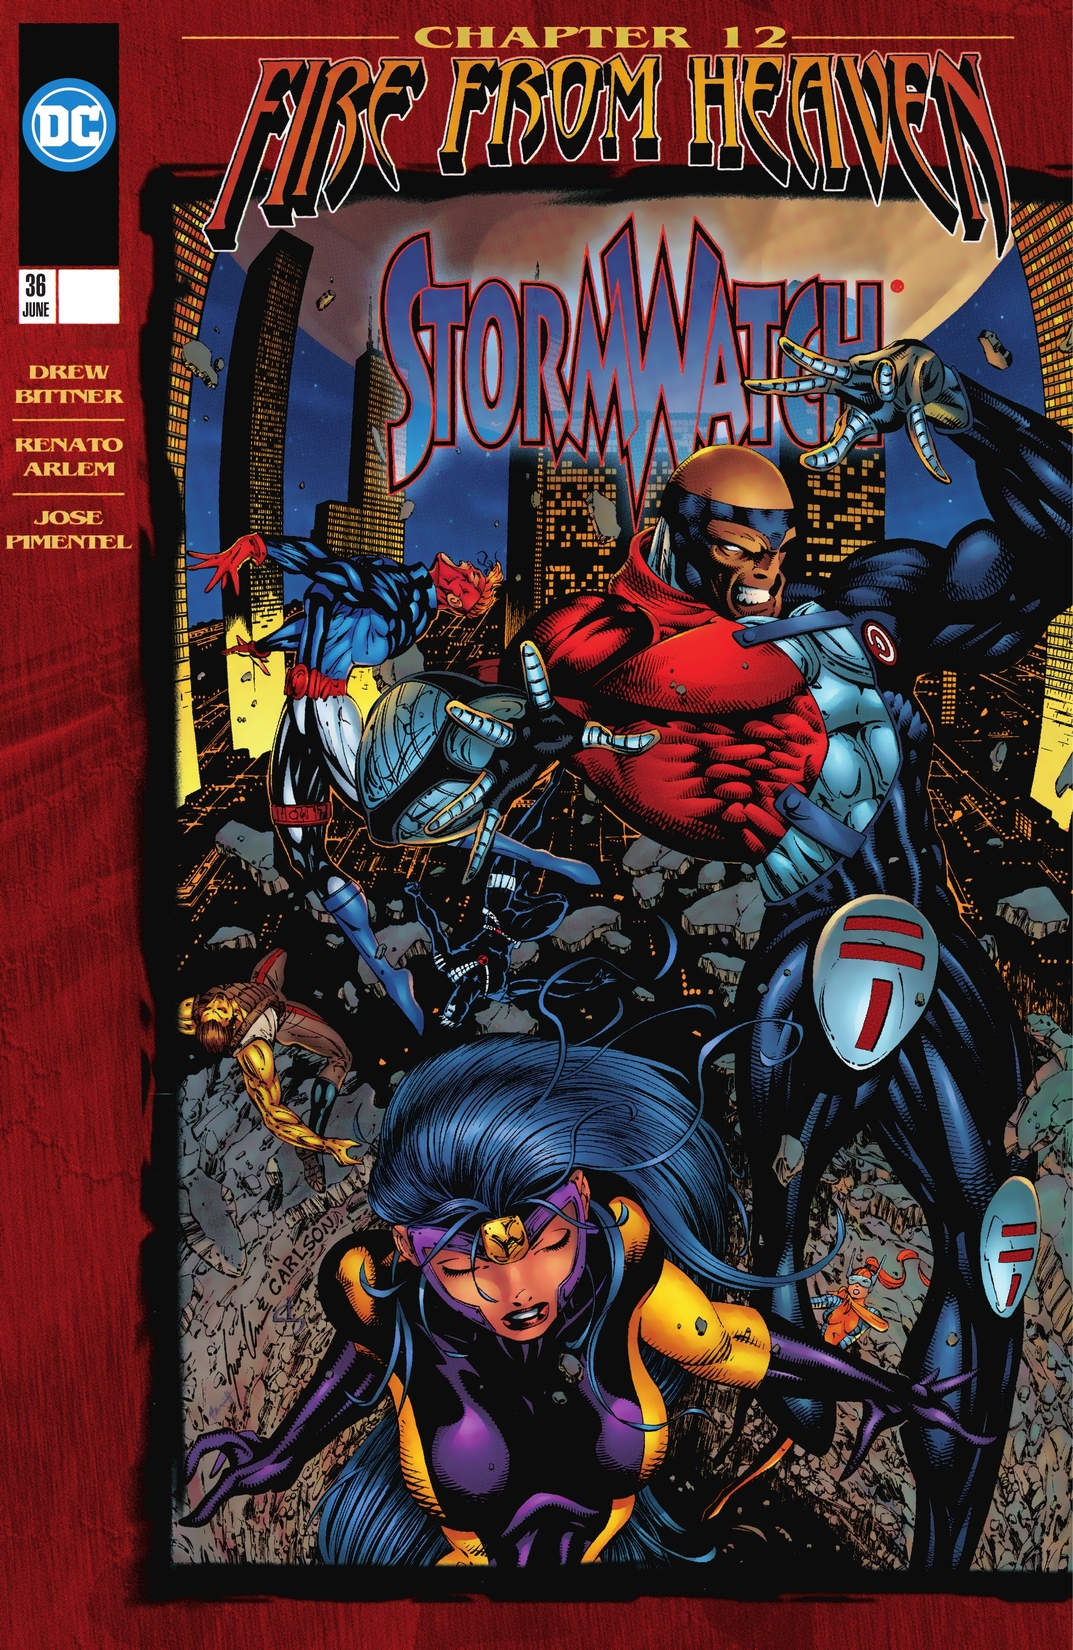 Stormwatch (1993-1997) #36 preview images